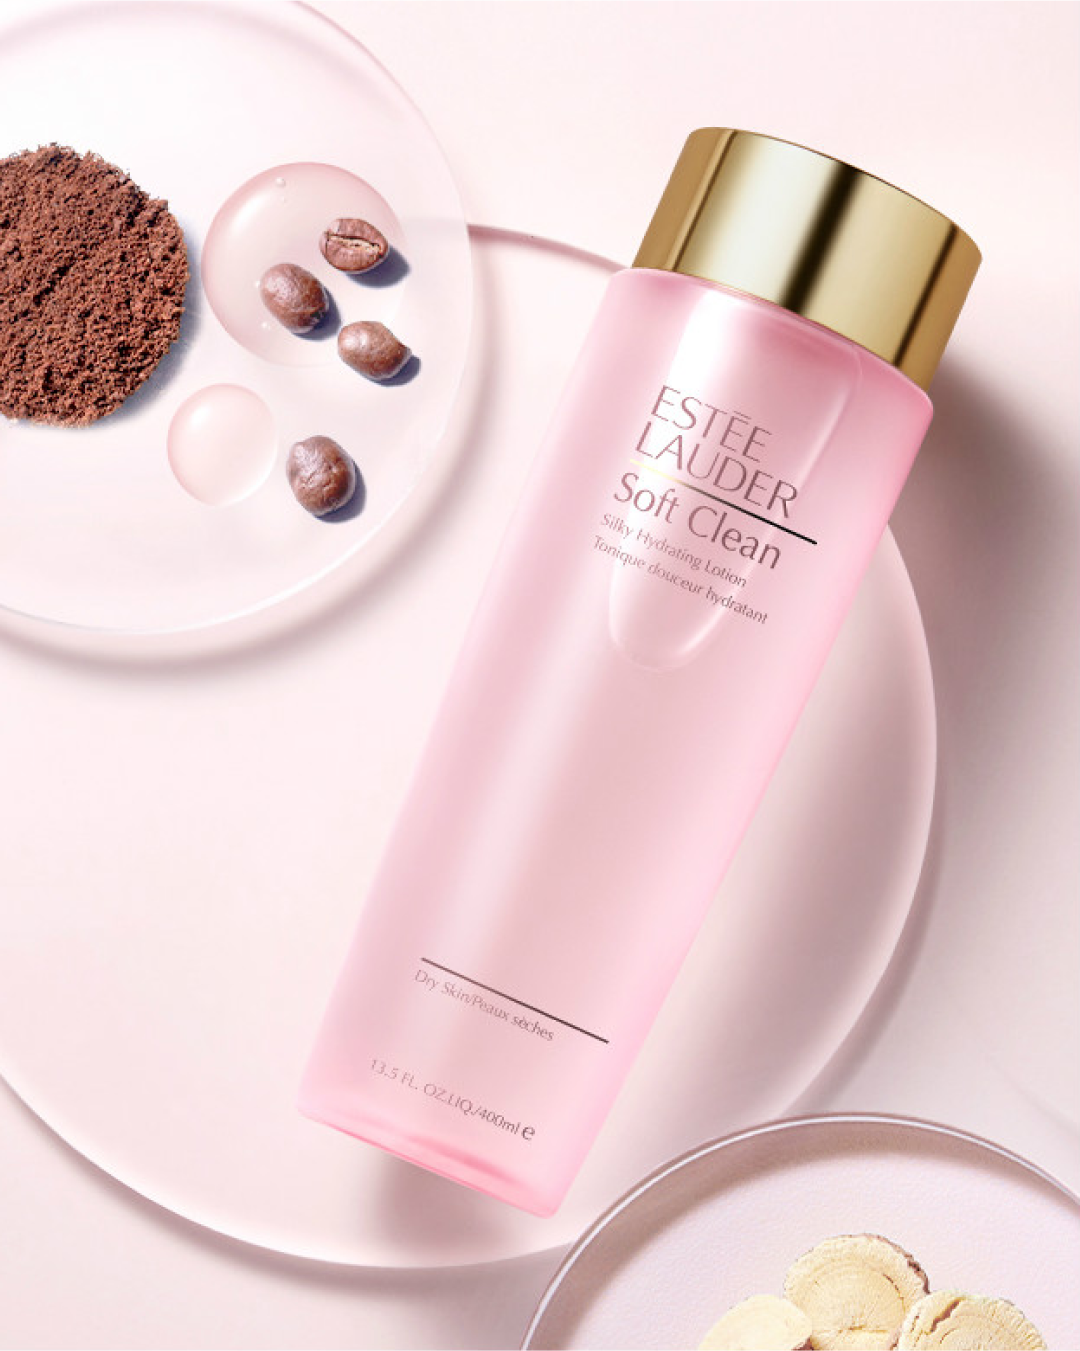 Estee Lauder Soft Clean Silky Hydrating Lotion (50ml) - Best Buy World Philippines